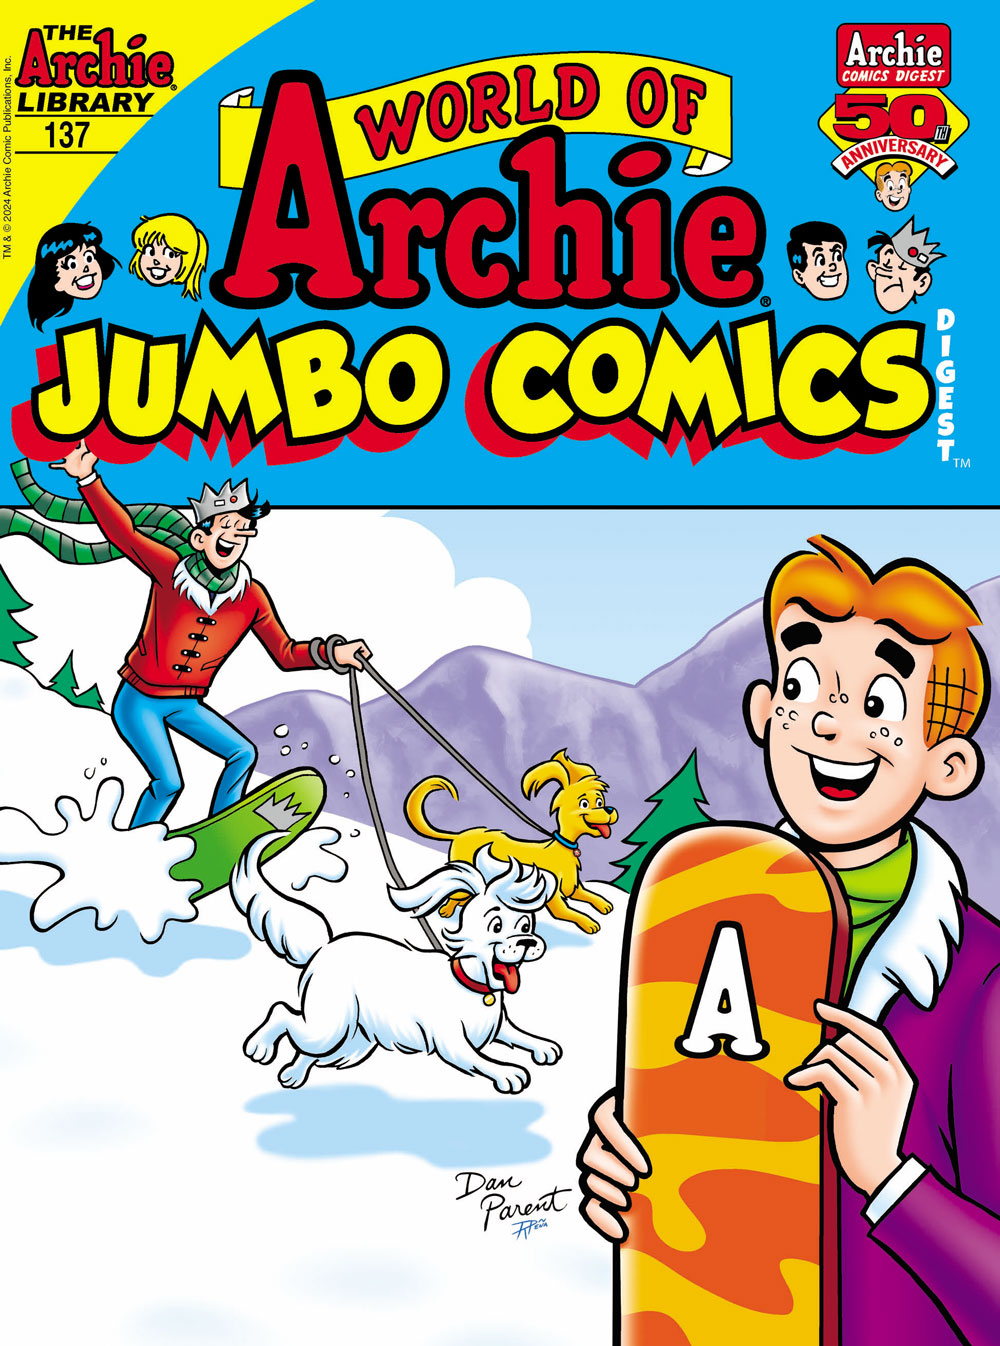 Cover of WORLD OF ARCHIE DIGEST #137. Archie watches Jughead snowboard down a hill, holding the dogs Vegas and Hot Dog, by their leashes.